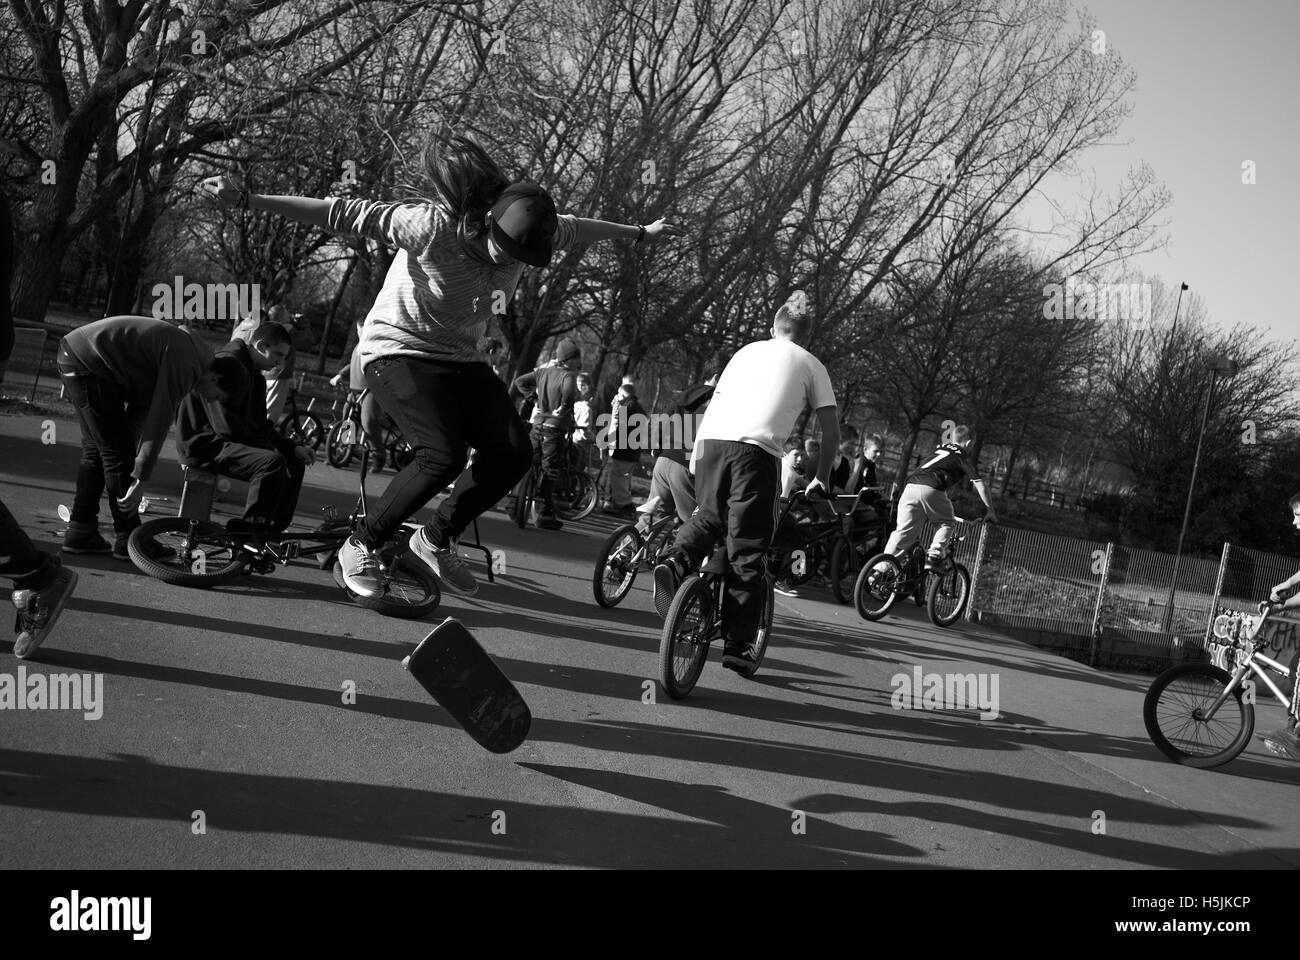 Cyclists and skateboarders at Exhibition Park skate bowl, Newcastle upon Tyne, England Stock Photo